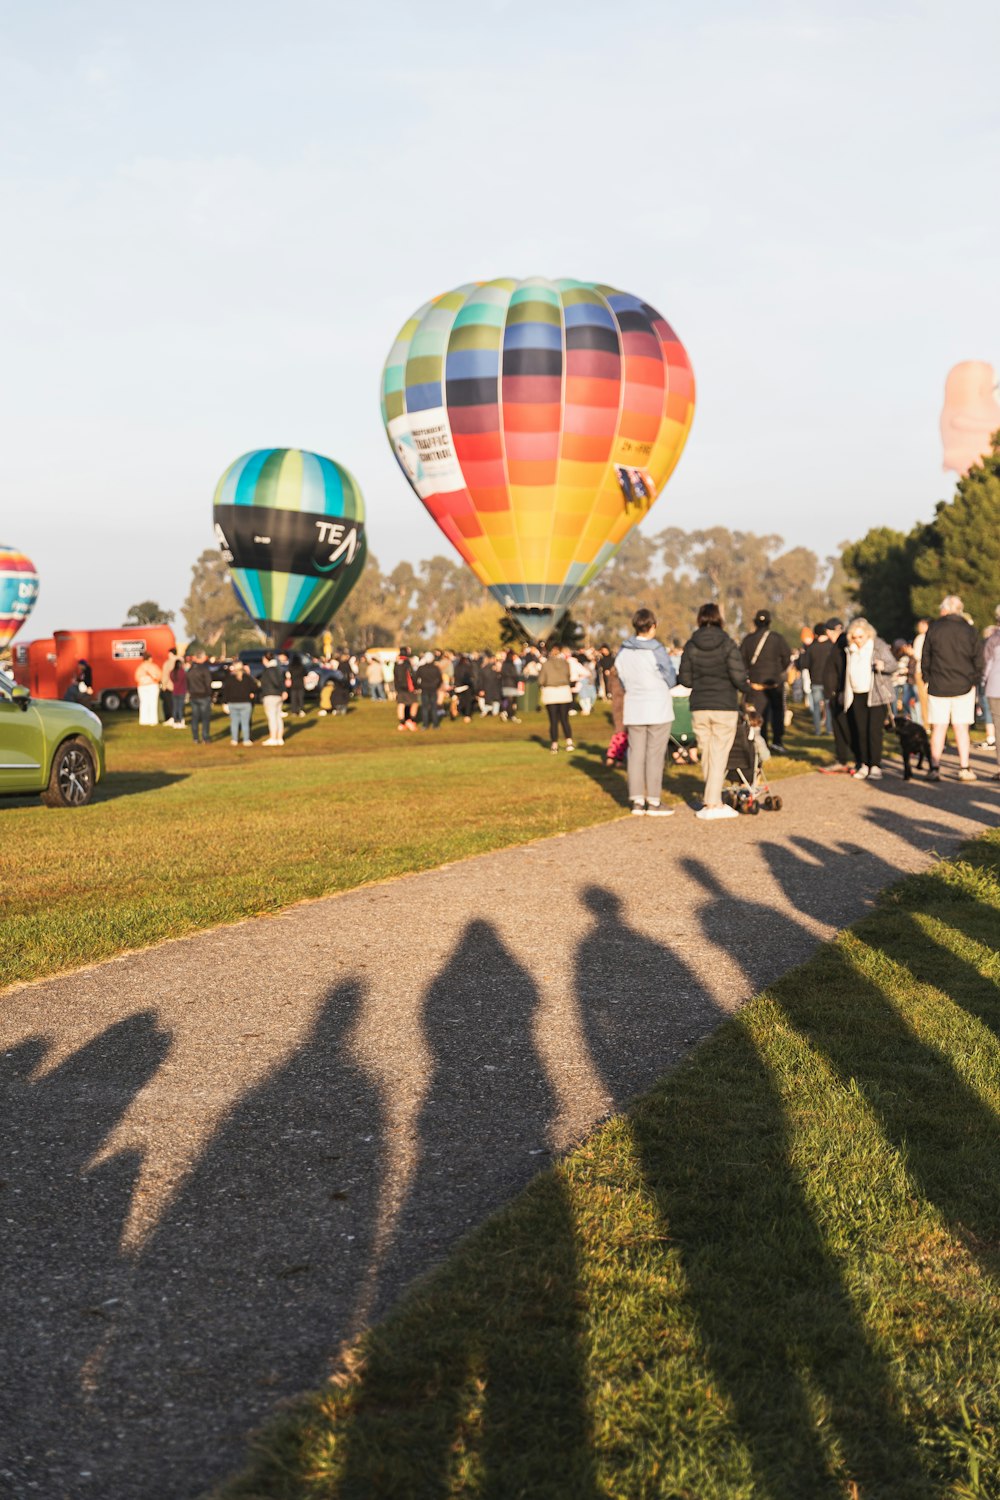 a group of people standing around hot air balloons